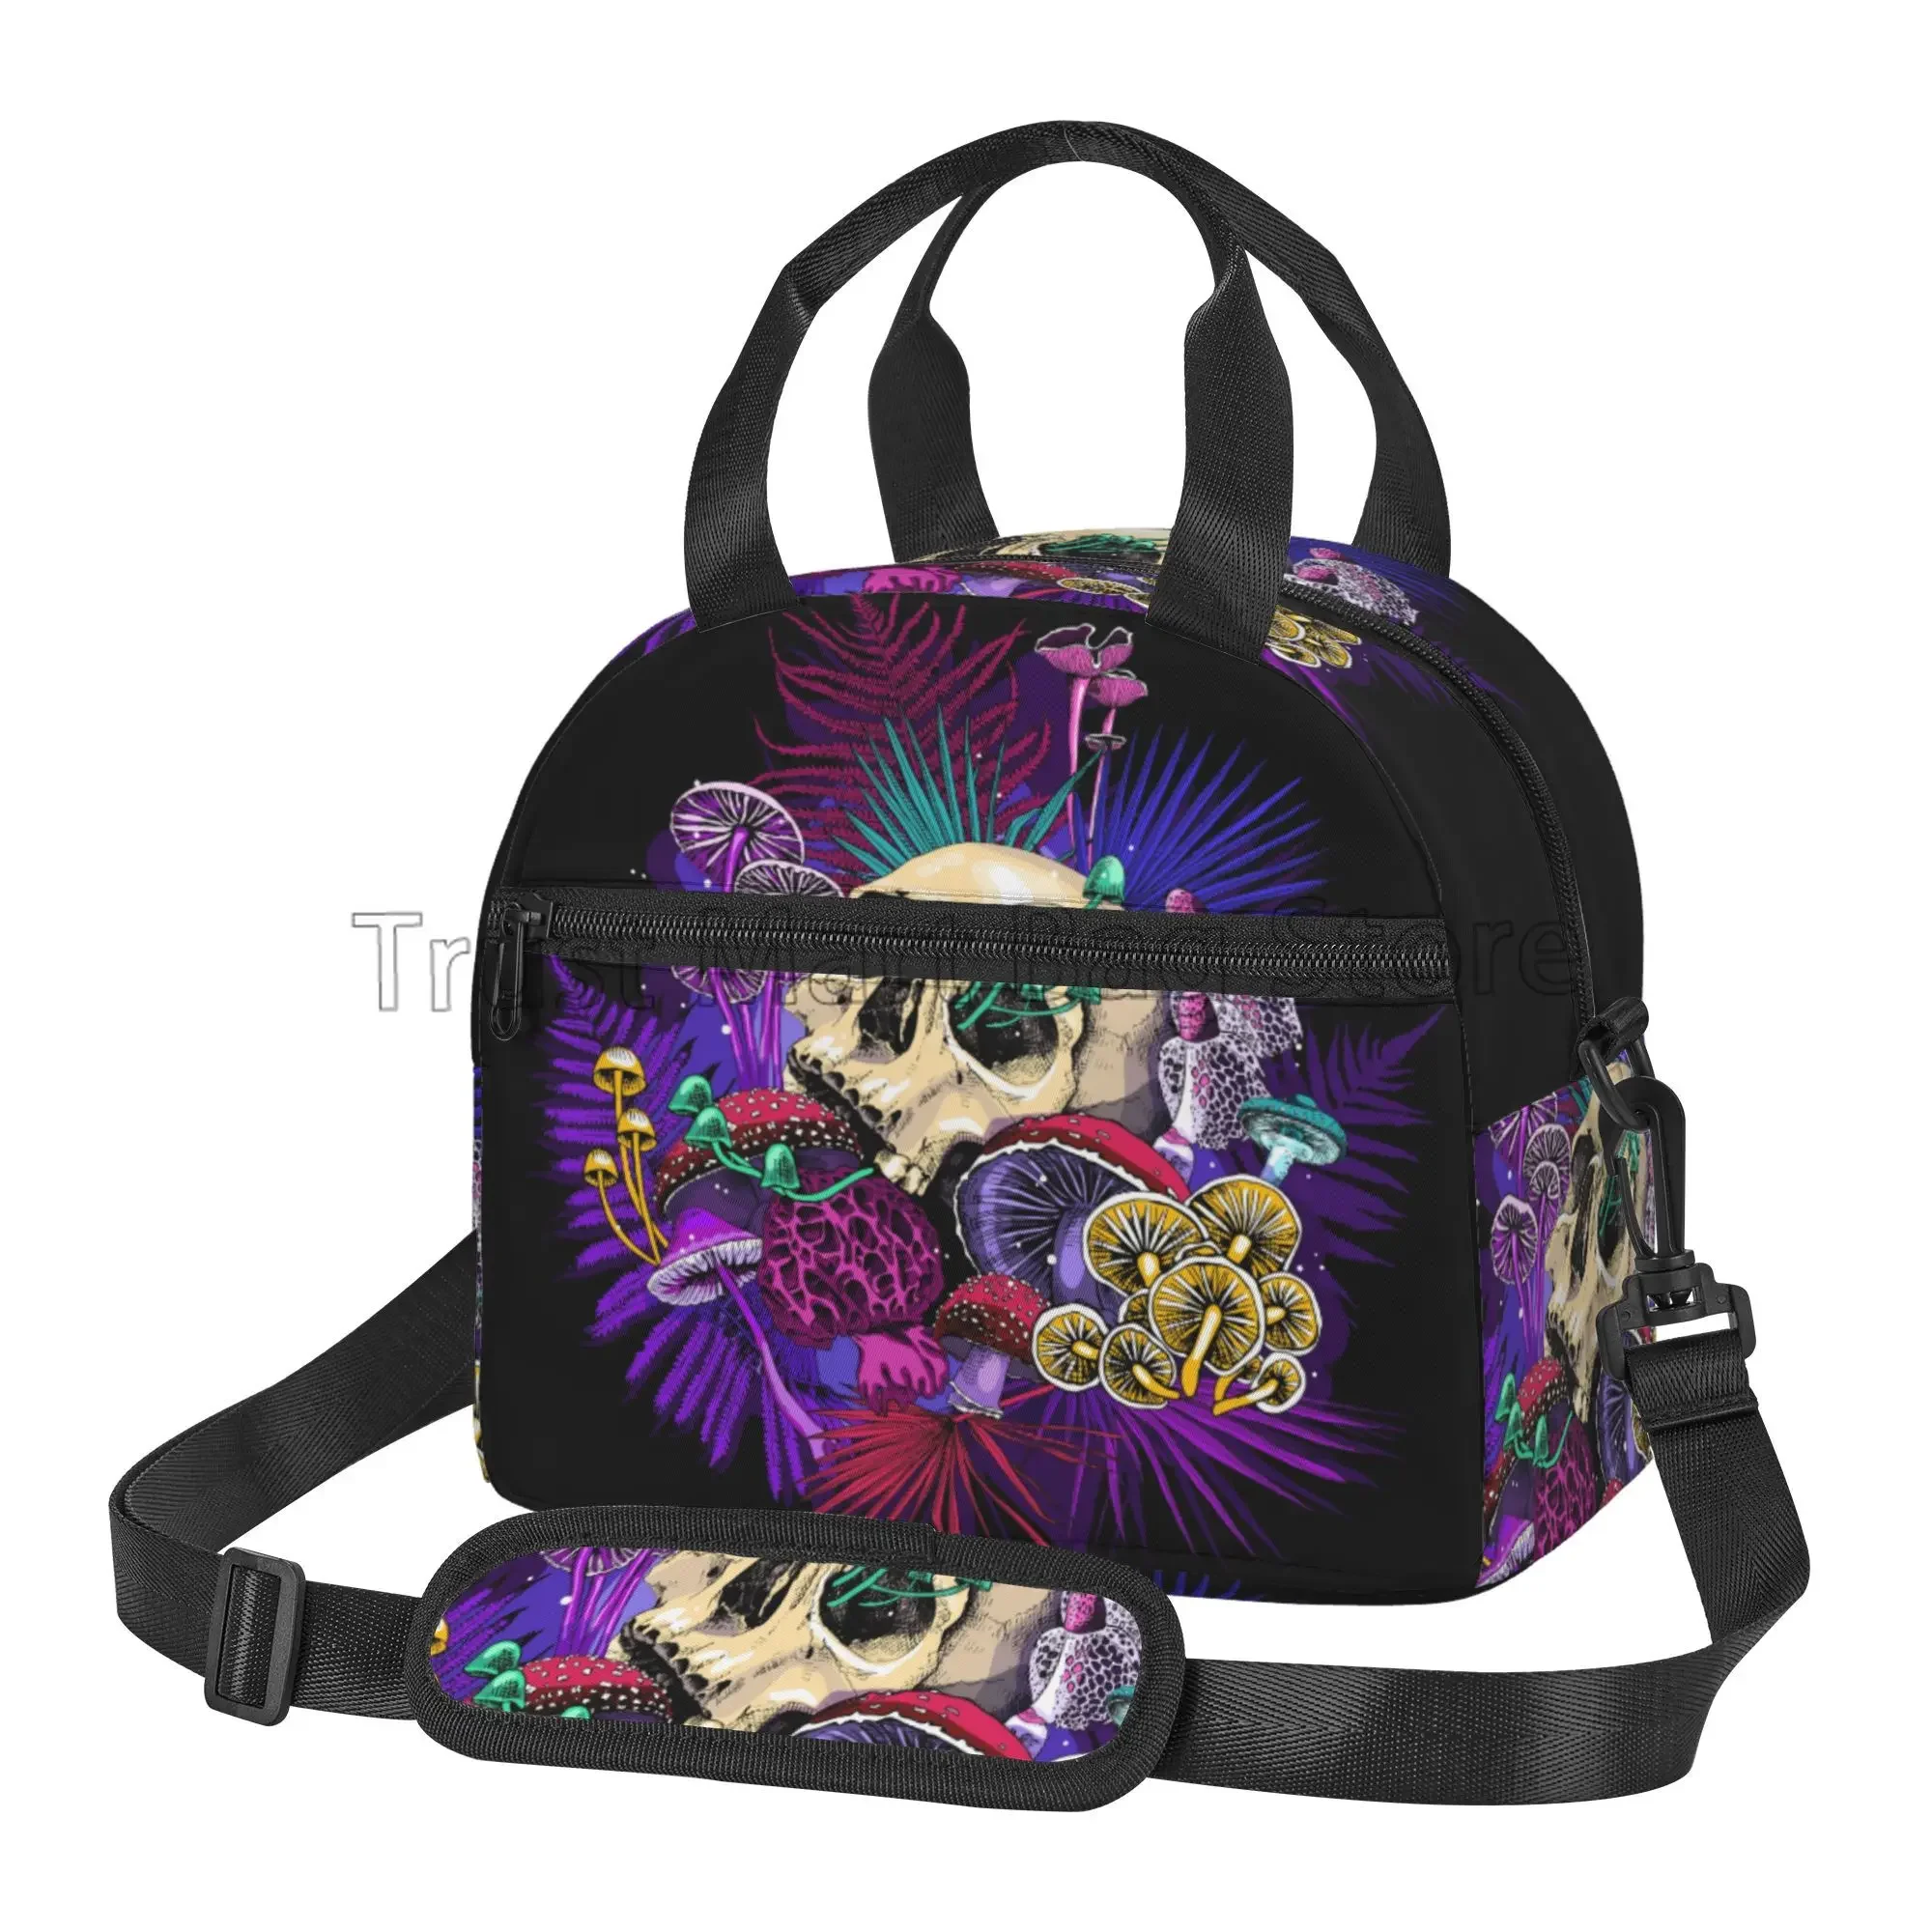 

Mushroom Skull Insulated Lunch Bag for Women Men Work Resuable Portable Thermal Bento Tote Bags with Adjustable Shoulder Strap